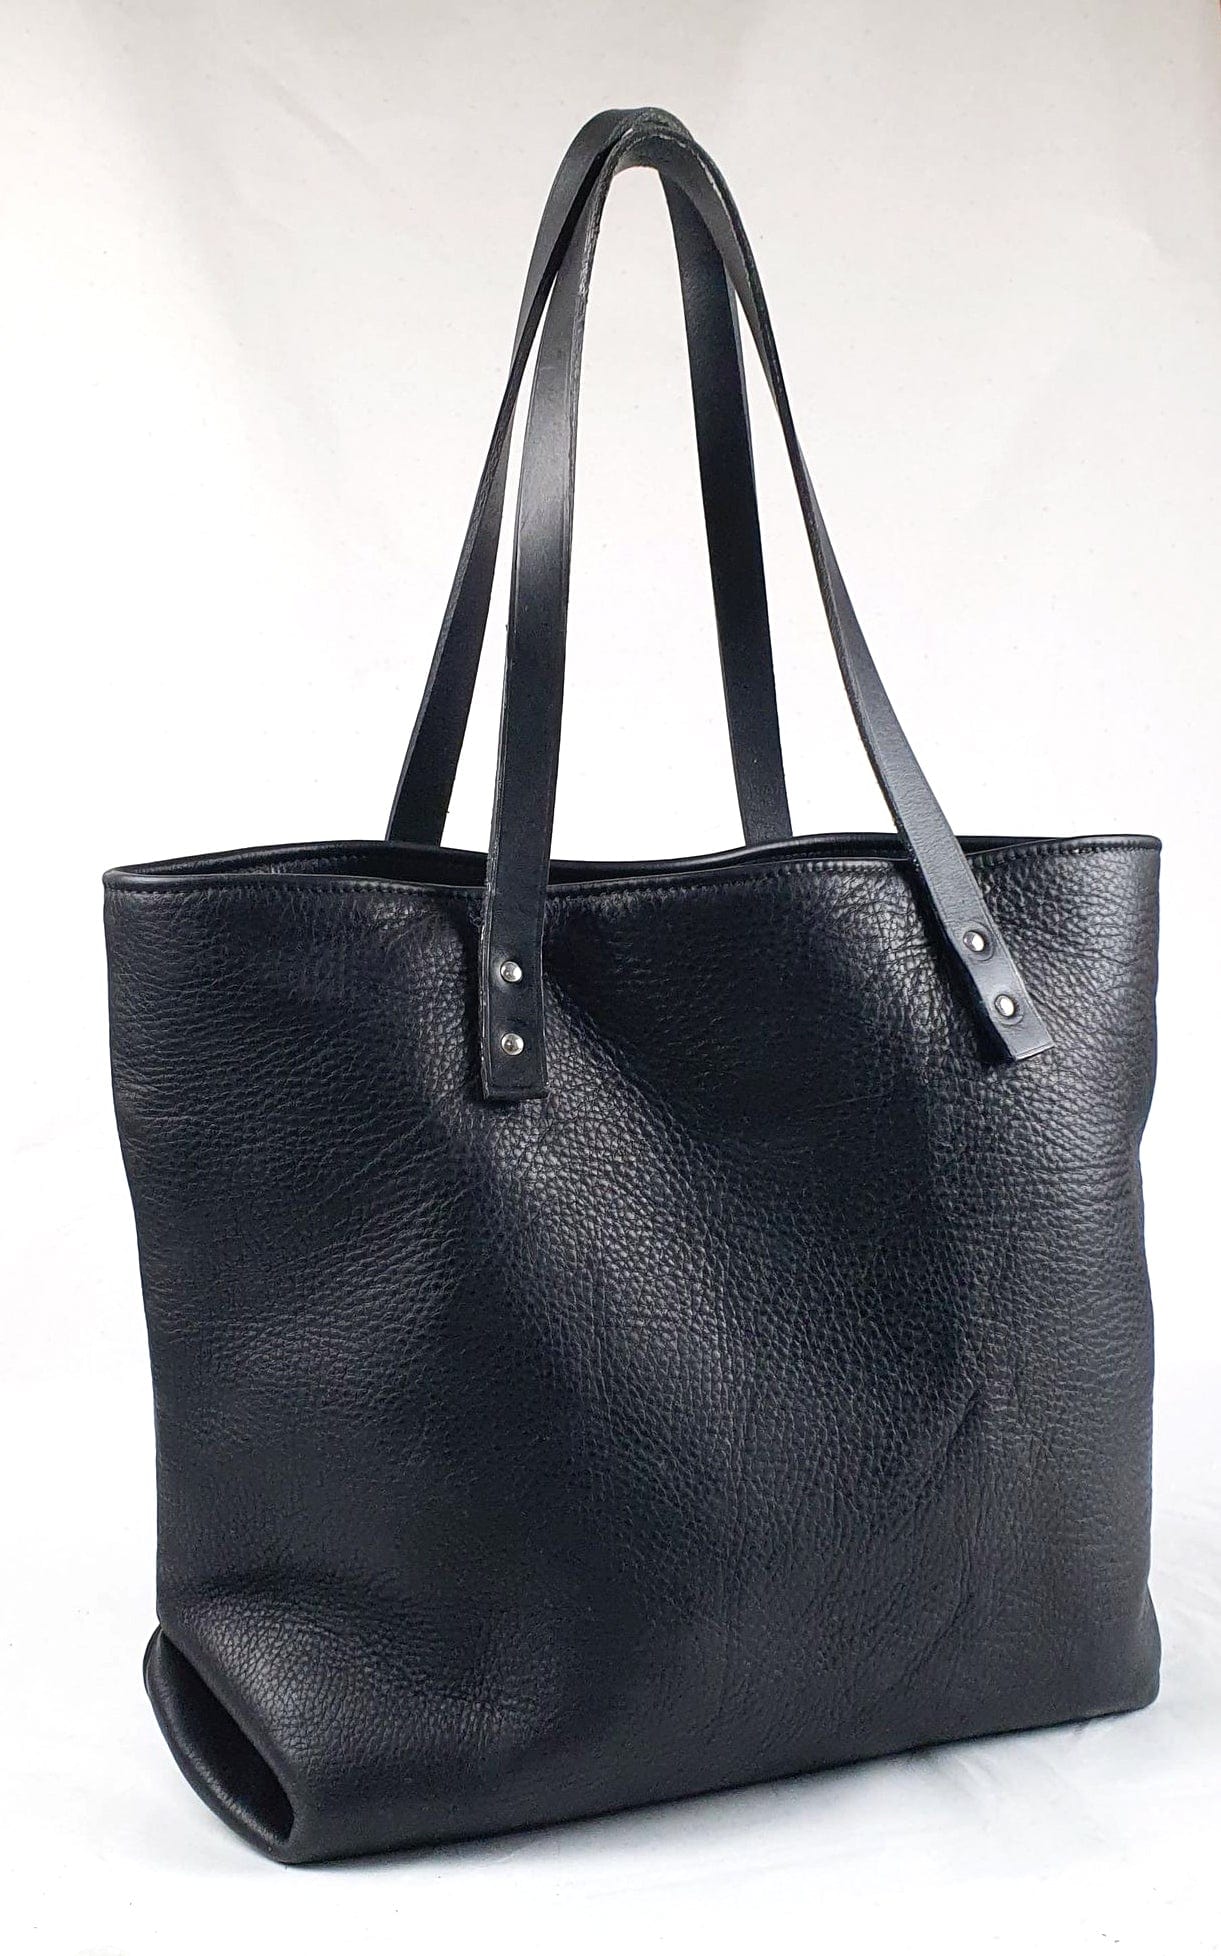 Hands of Tym Course 'Bag in a Day' Practical Leather Course Tote Bag